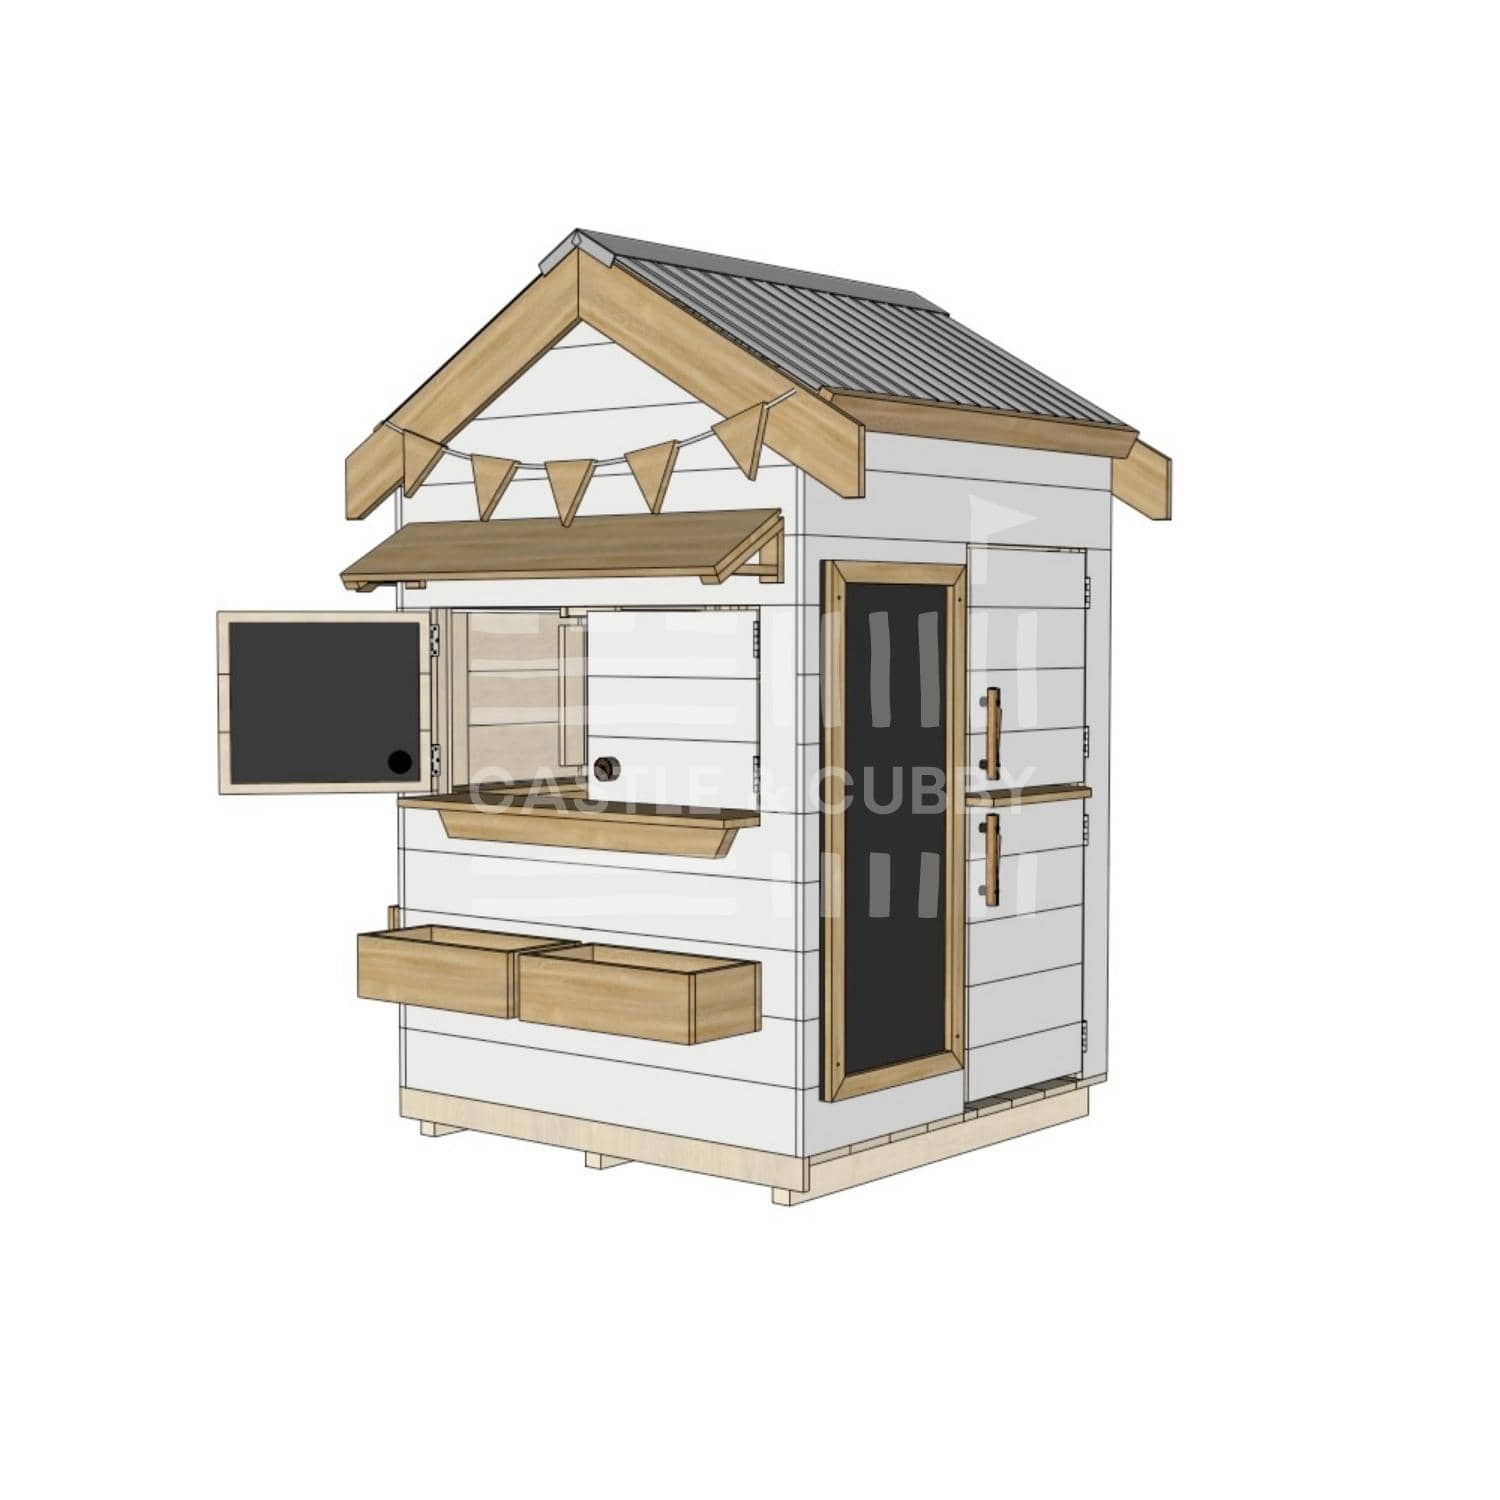 Pitched roof painted wooden cubby house residential and family homes little square accessories